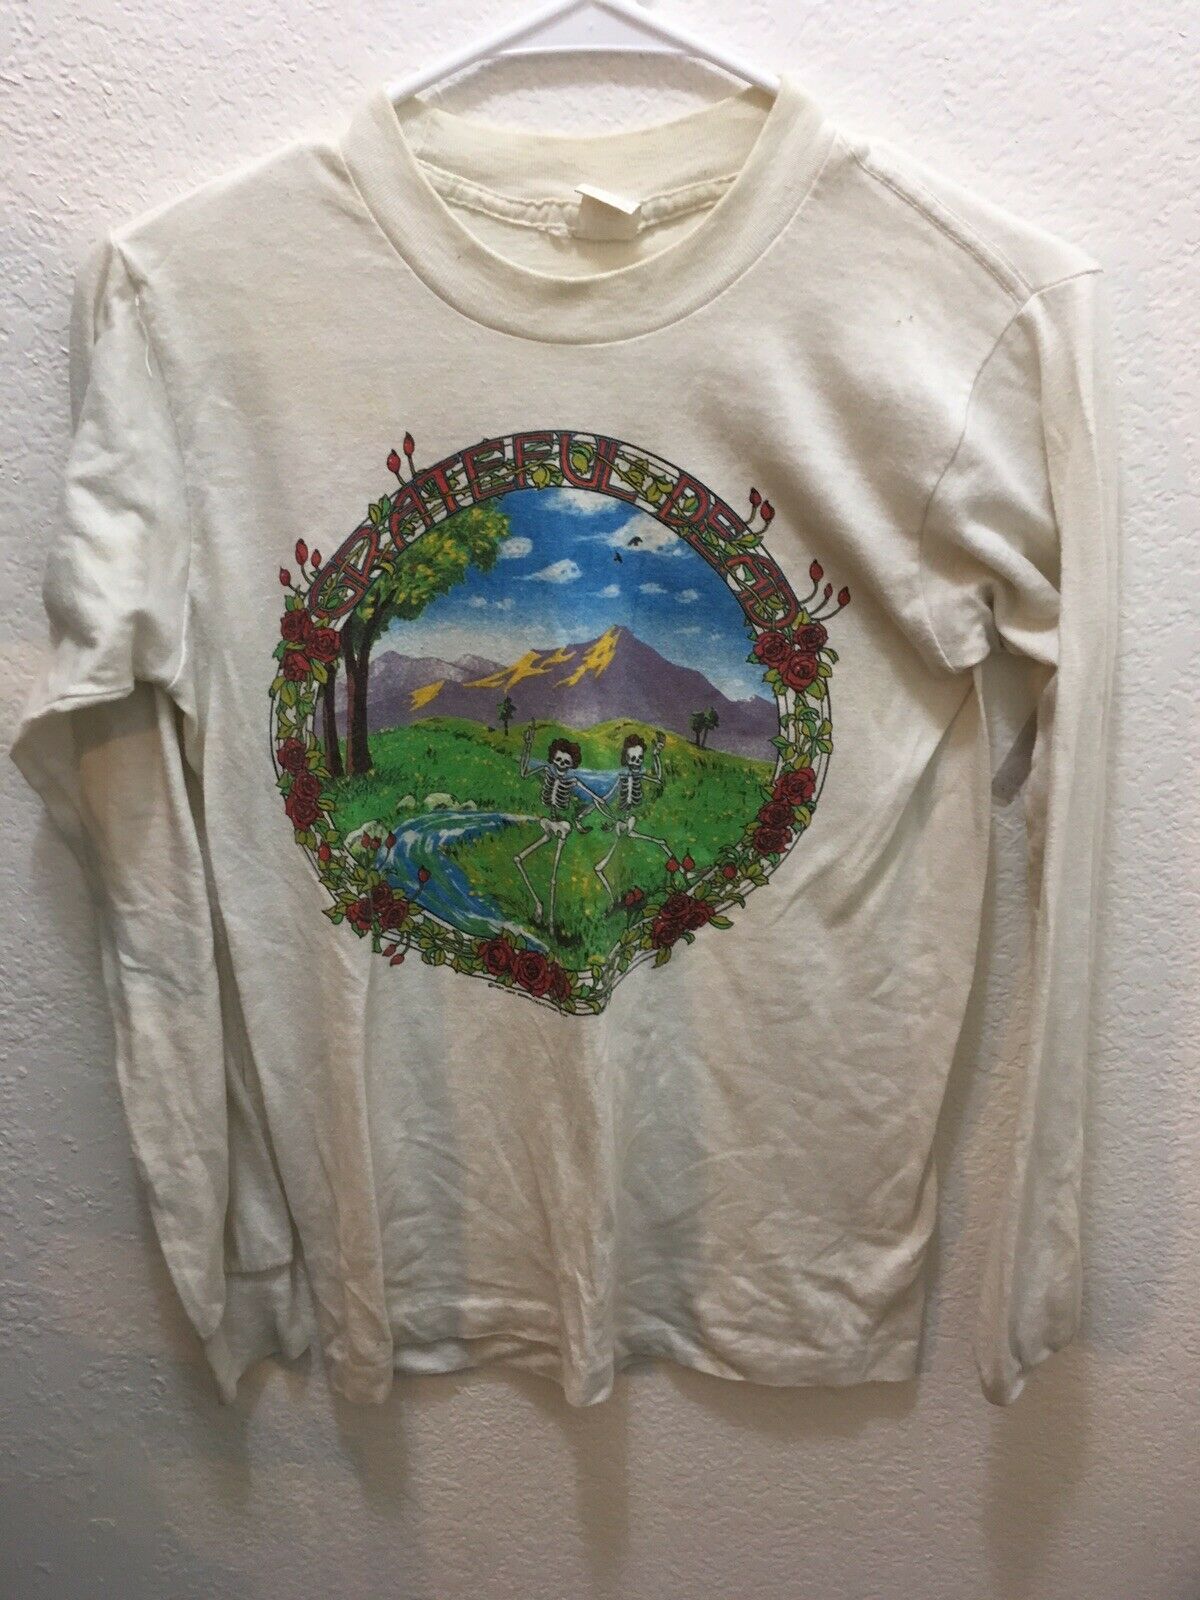 1984 Vintage Grateful Dead Shirt M/L SPRING TOUR LONG SLEEVES – xEtsy